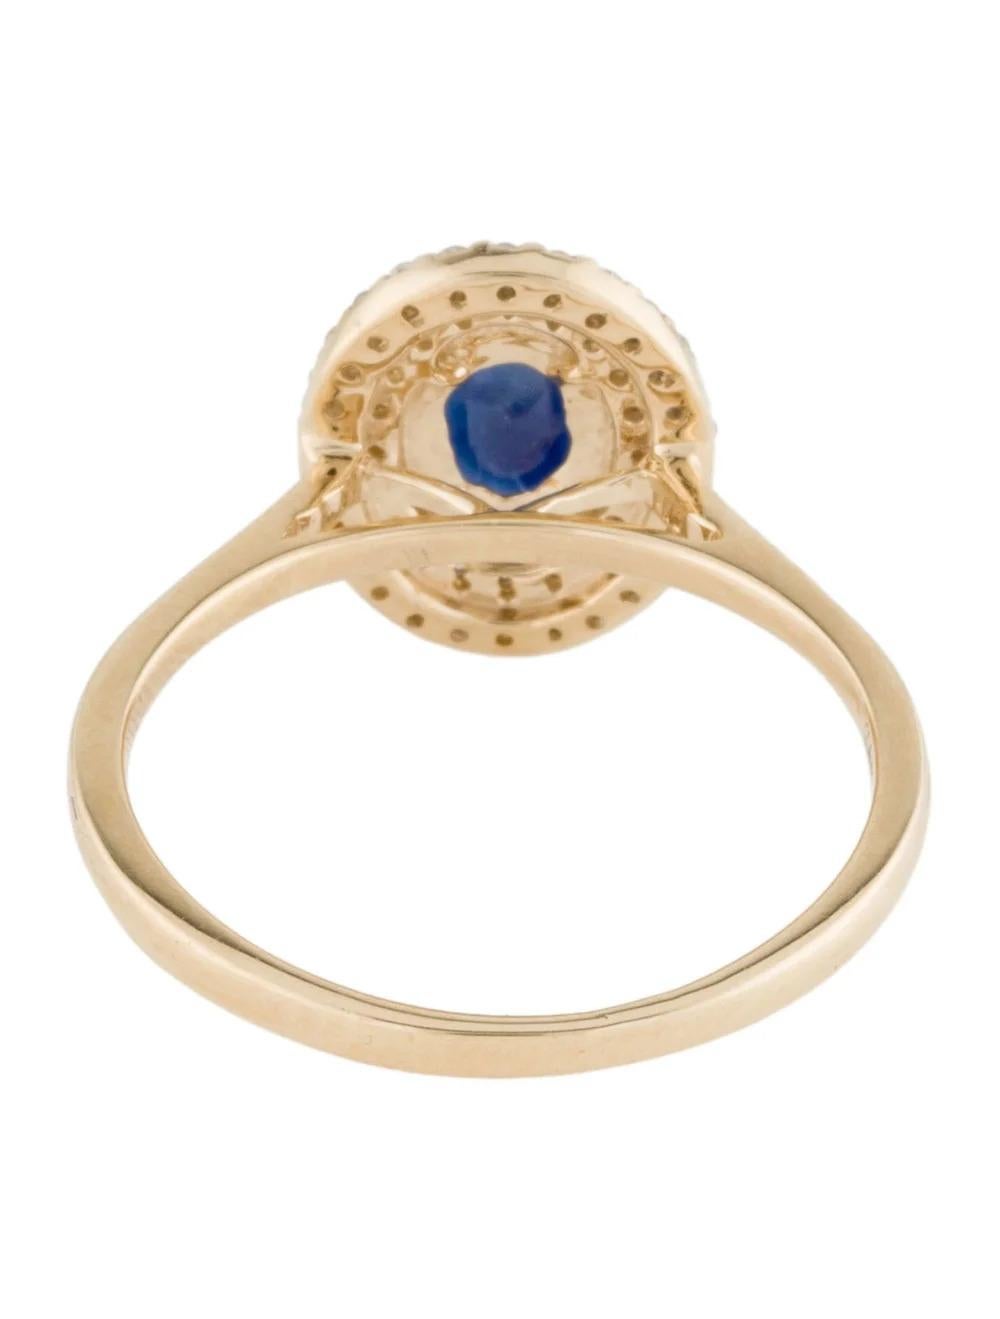 14K Sapphire & Diamond Cocktail Ring, Size 6.25 - Elegant Statement Jewelry In New Condition For Sale In Holtsville, NY